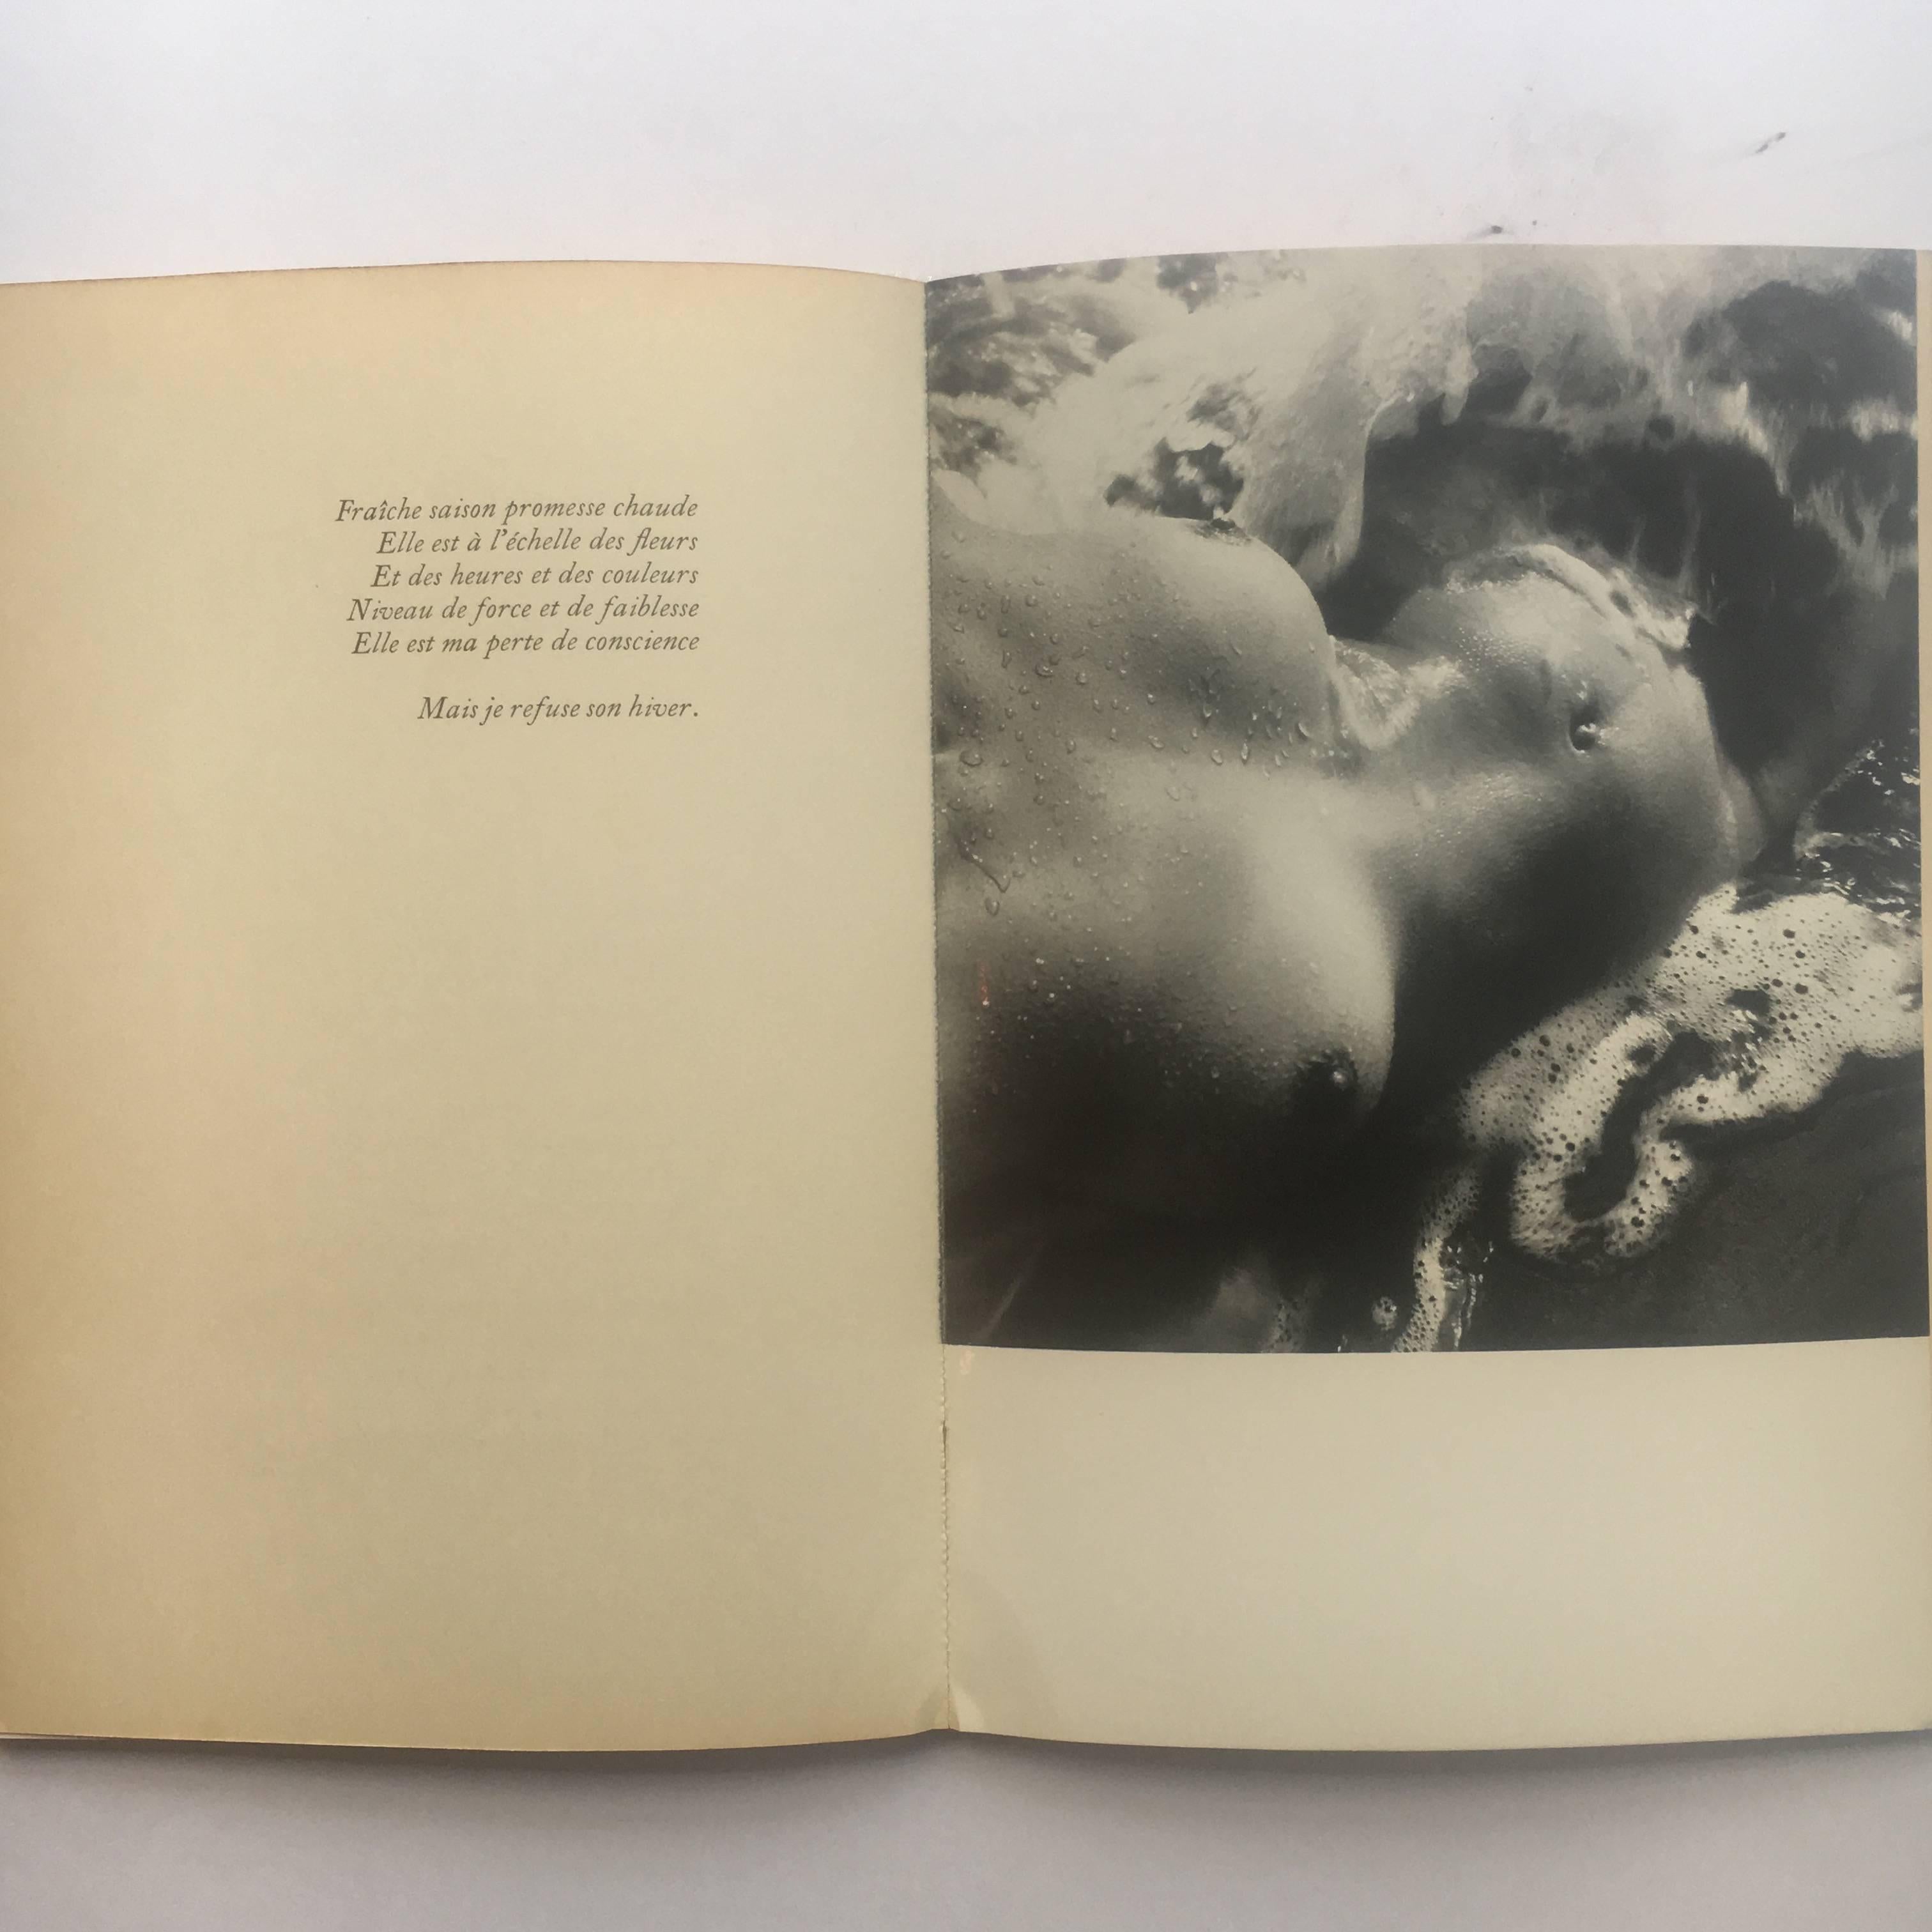 1st edition of Corps Memorable published in 1957 by Pierre Seghers, Paris with the front cover designed by Picasso

An incredibly important. This was the first book of nude photography that was allowed to be sold publicly in Paris. A remarkable